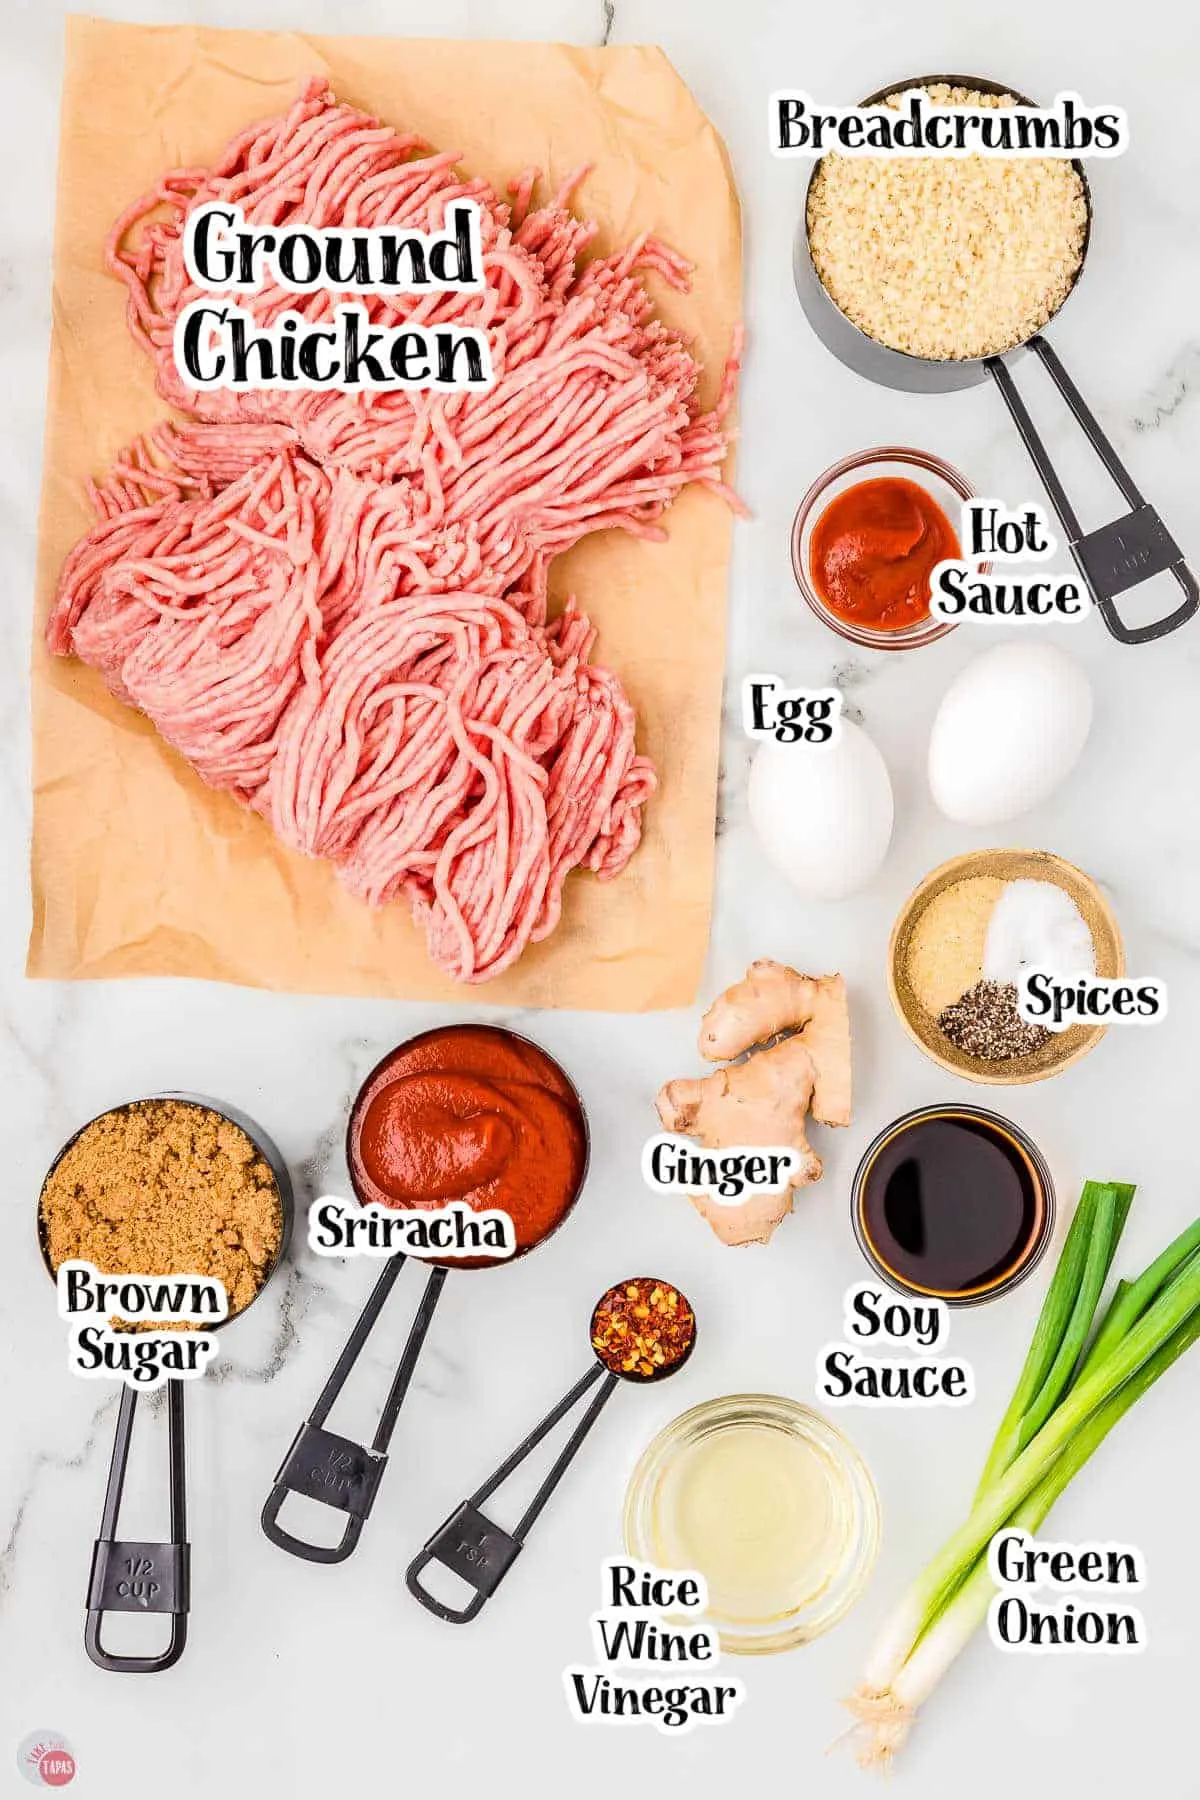 labeled picture of ingredients for firecracker meatball recipe with a pinch of salt on a plate